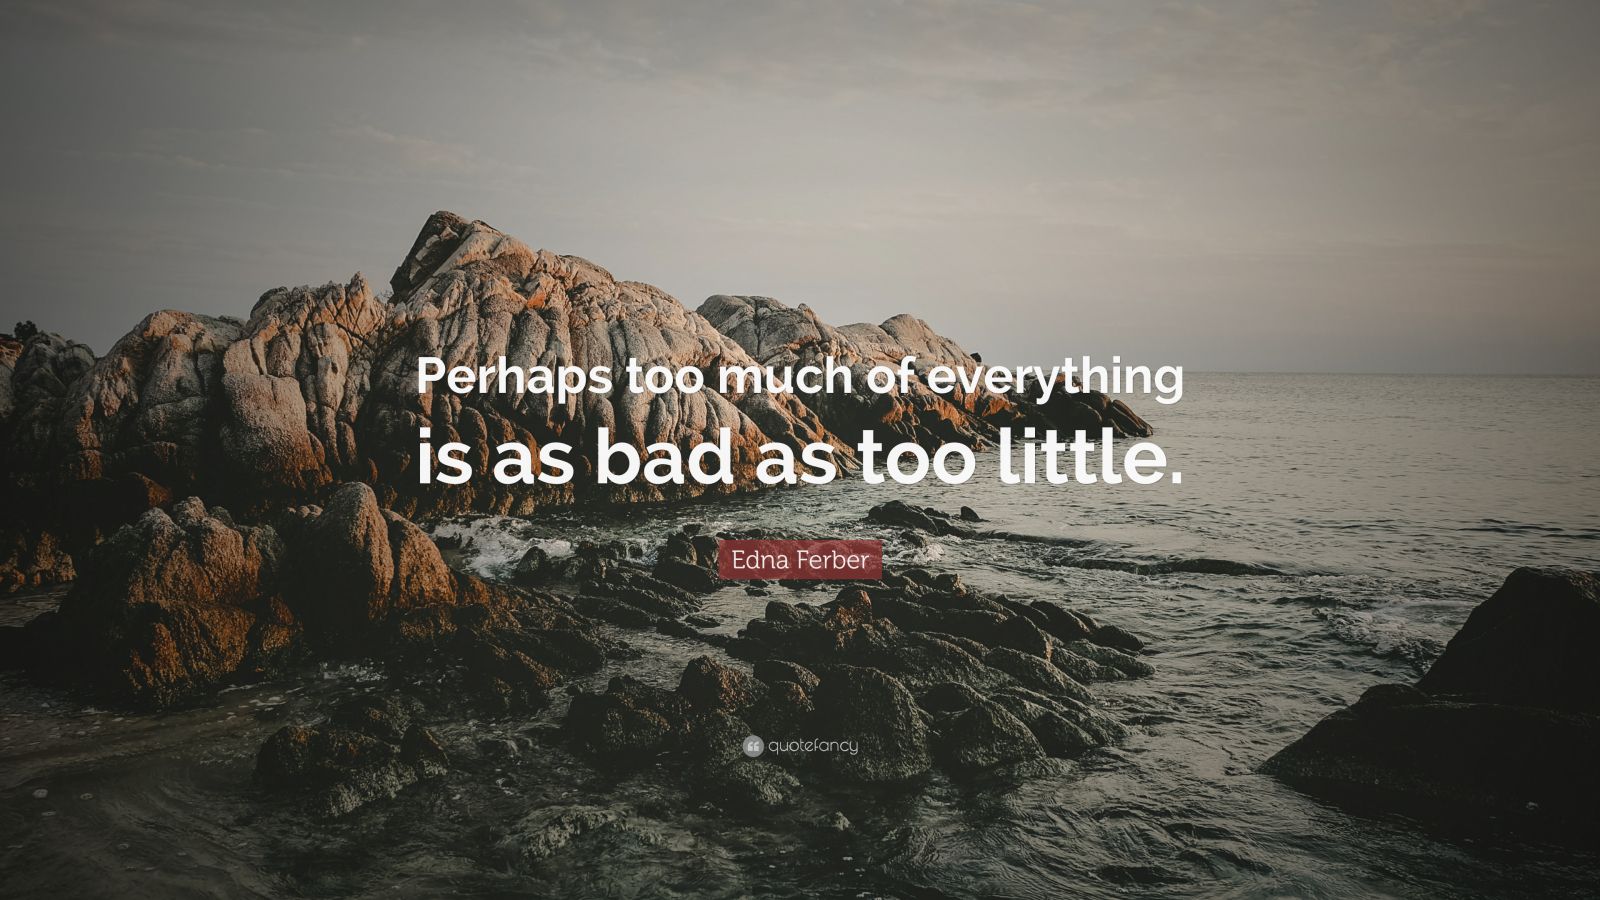 Edna Ferber Quote: “Perhaps too much of everything is as bad as too